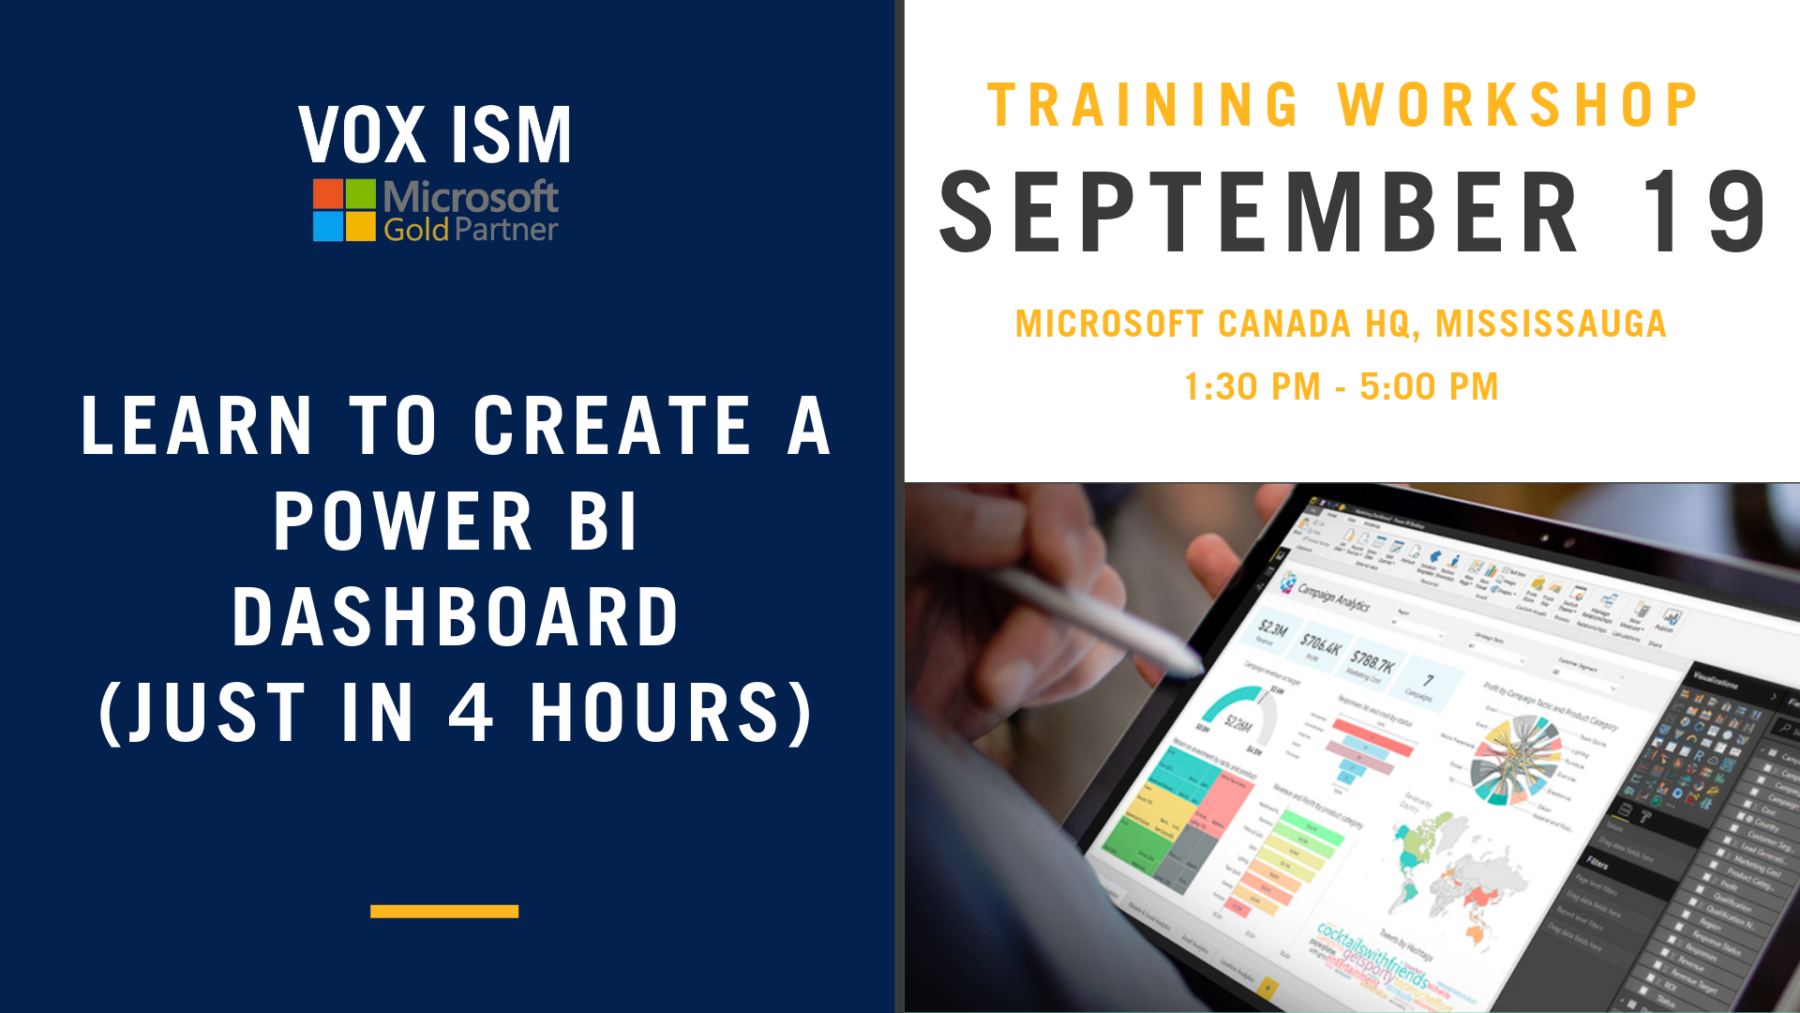 Learn to create Power BI Dashboards (just in 4 hours)- September 19 - Super Event - VOX ISM